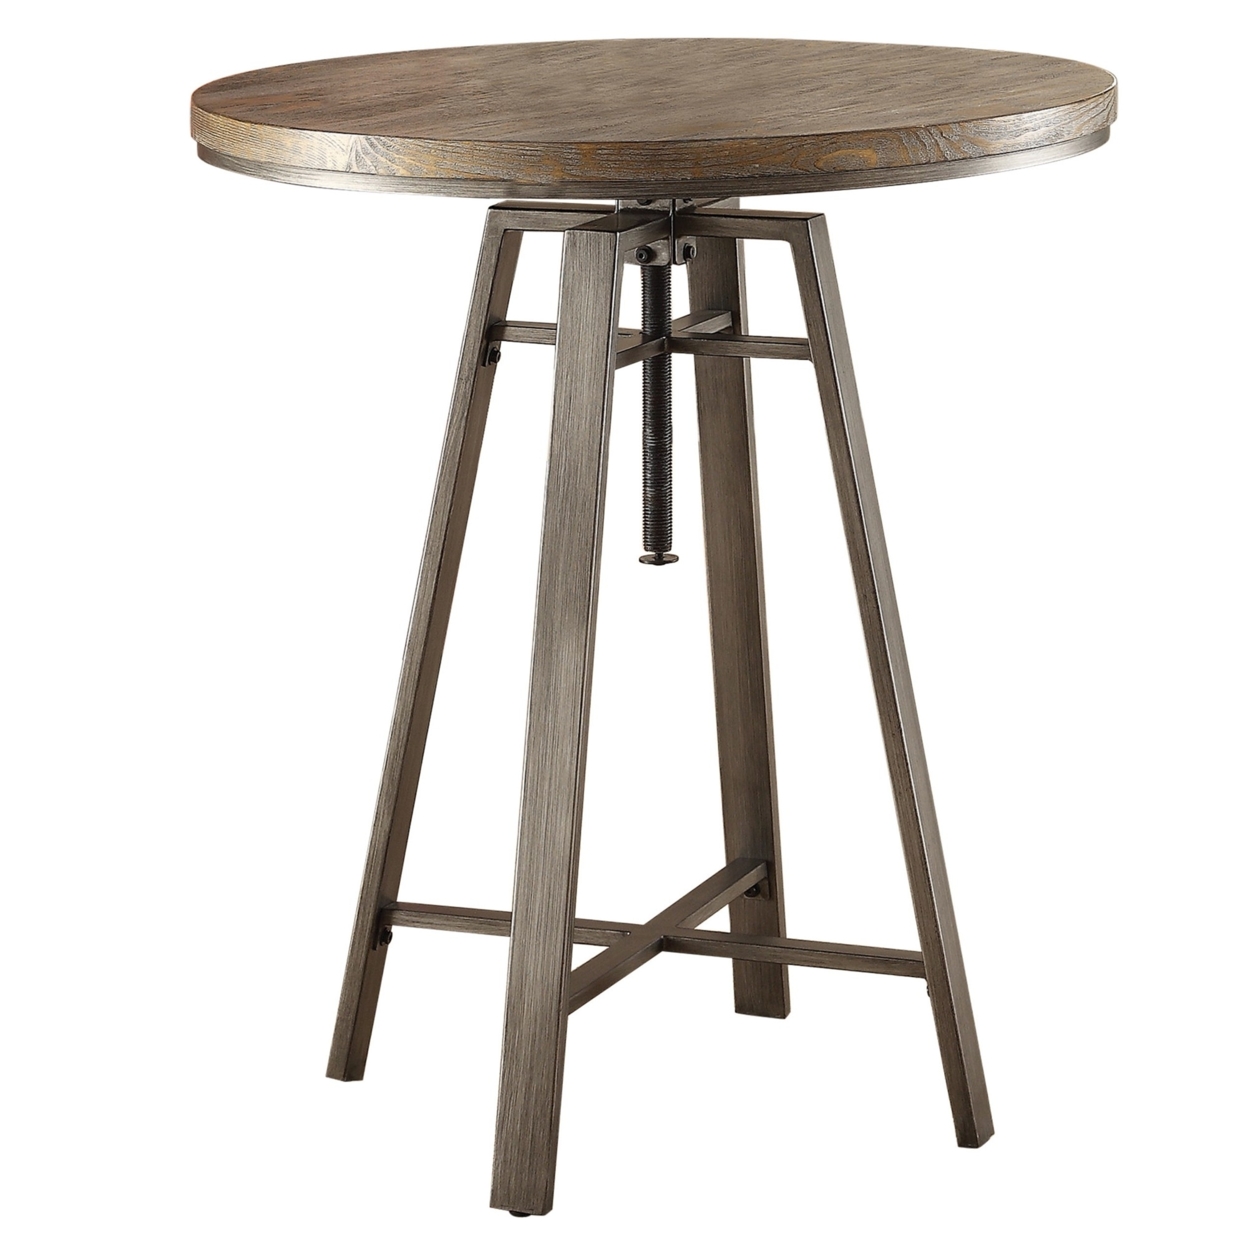 Contemporary Bar Table With Swivel Adjustable Height Mechanism, Brown- Saltoro Sherpi